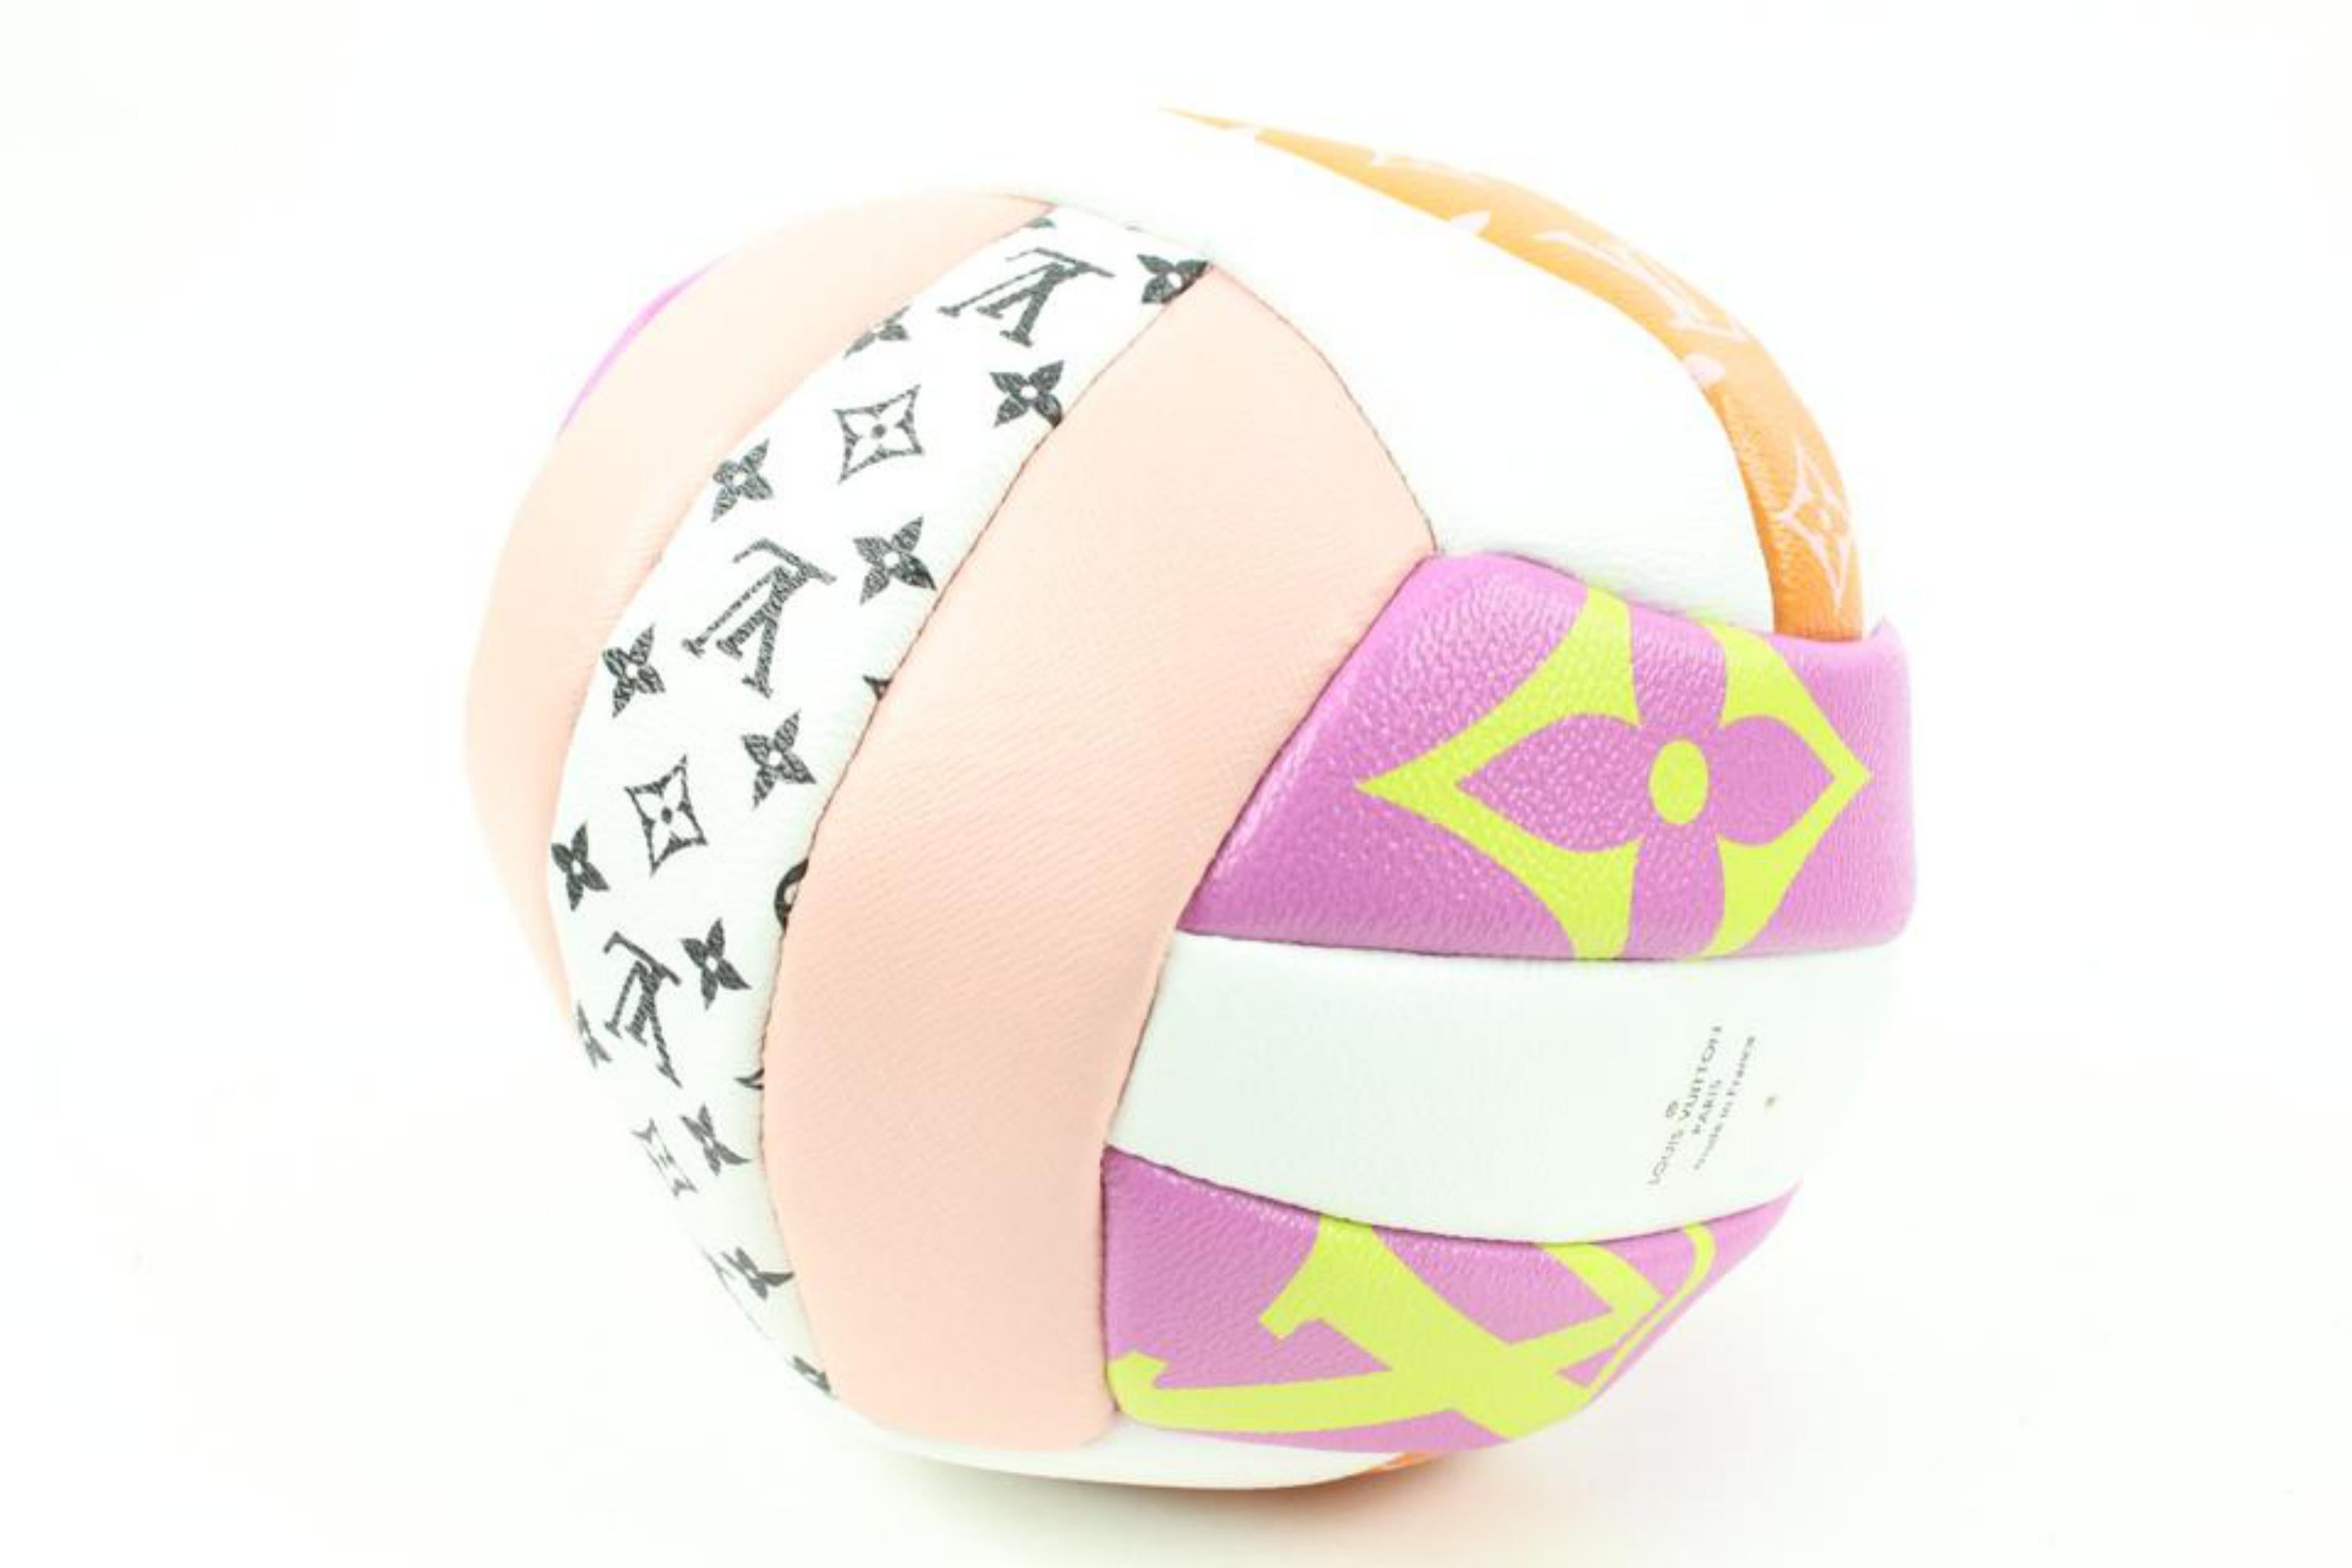 Louis Vuitton SS20 Limited Pink x Orange Monogram Giant Volleyball 121lv43 In New Condition For Sale In Dix hills, NY